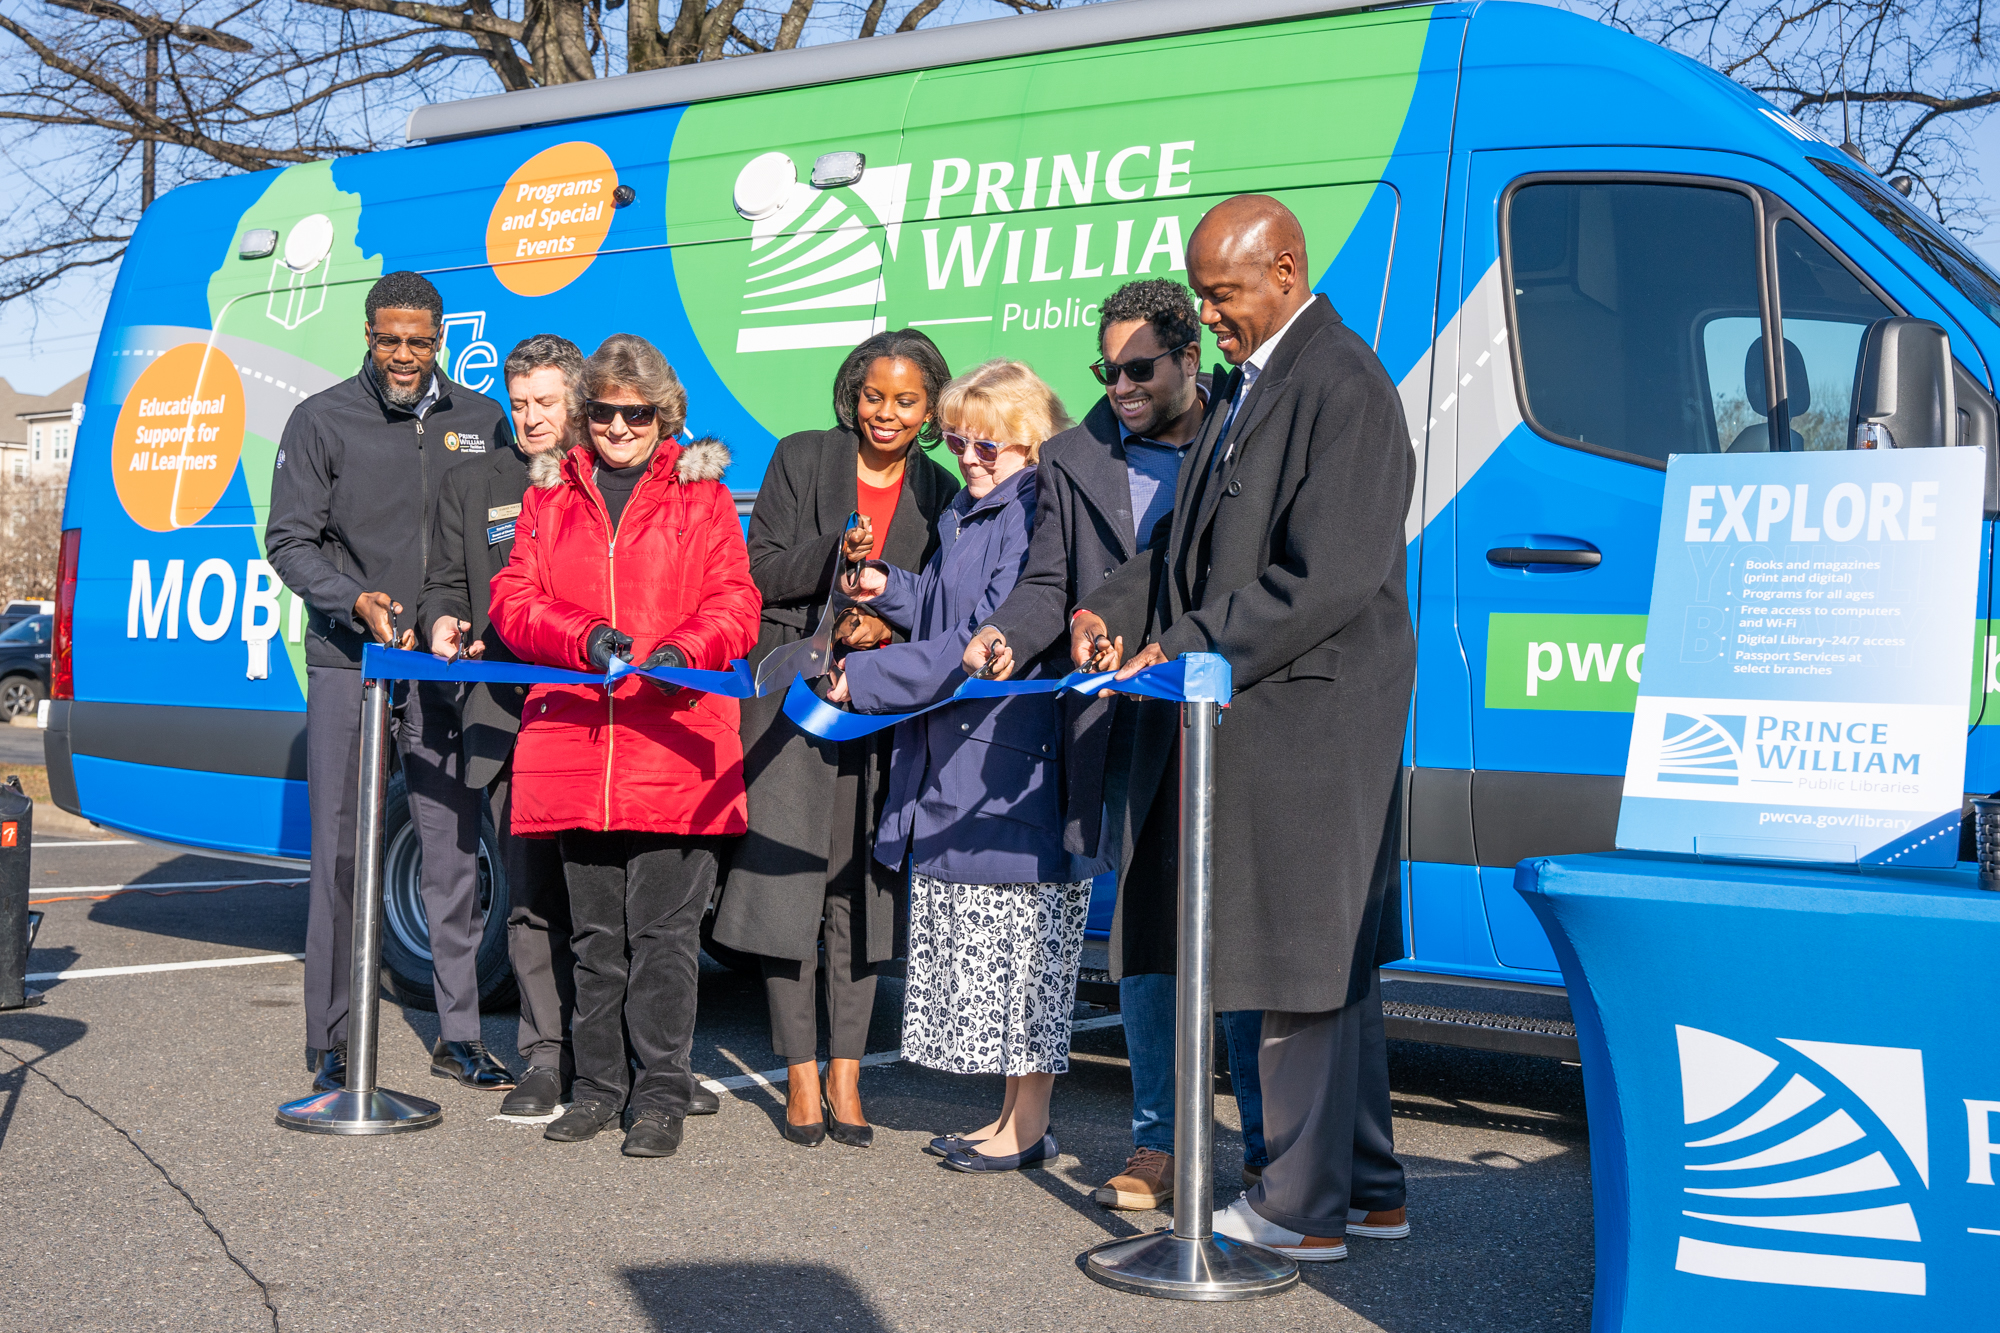 Prince William Public Libraries Celebrates New Mobile Library at Ribbon Cutting Ceremony